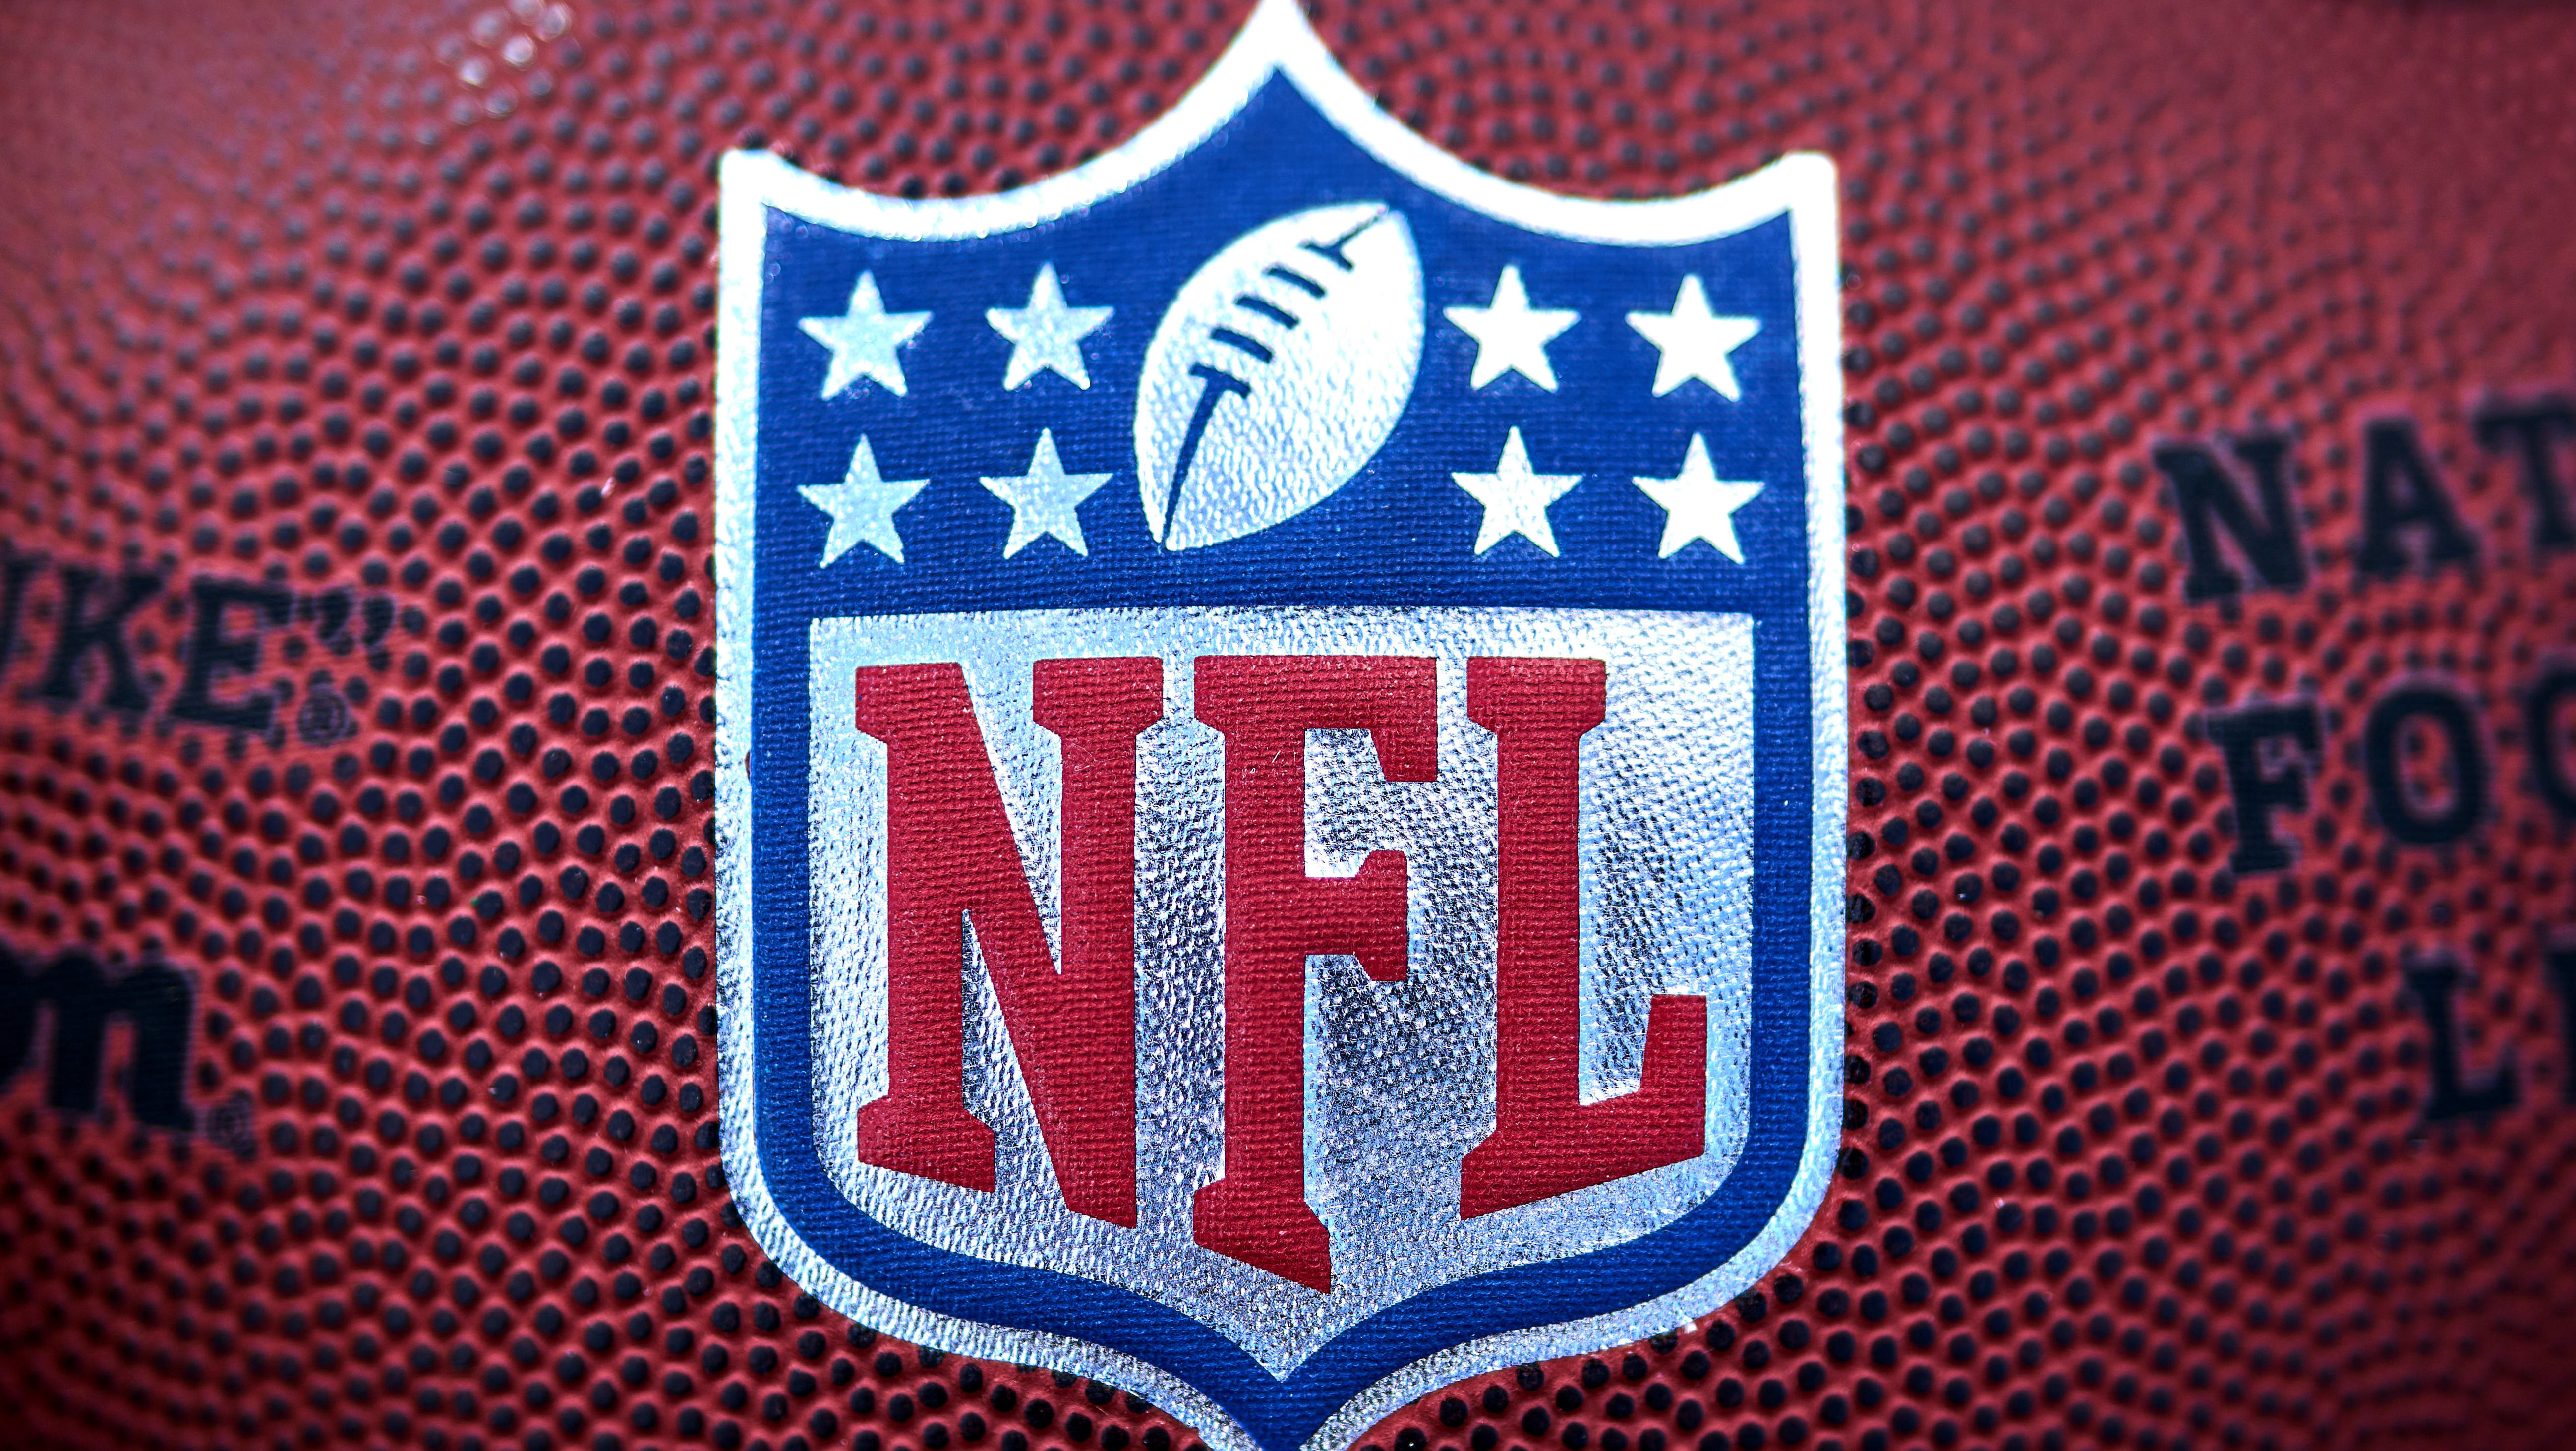 nfl ticket streaming price